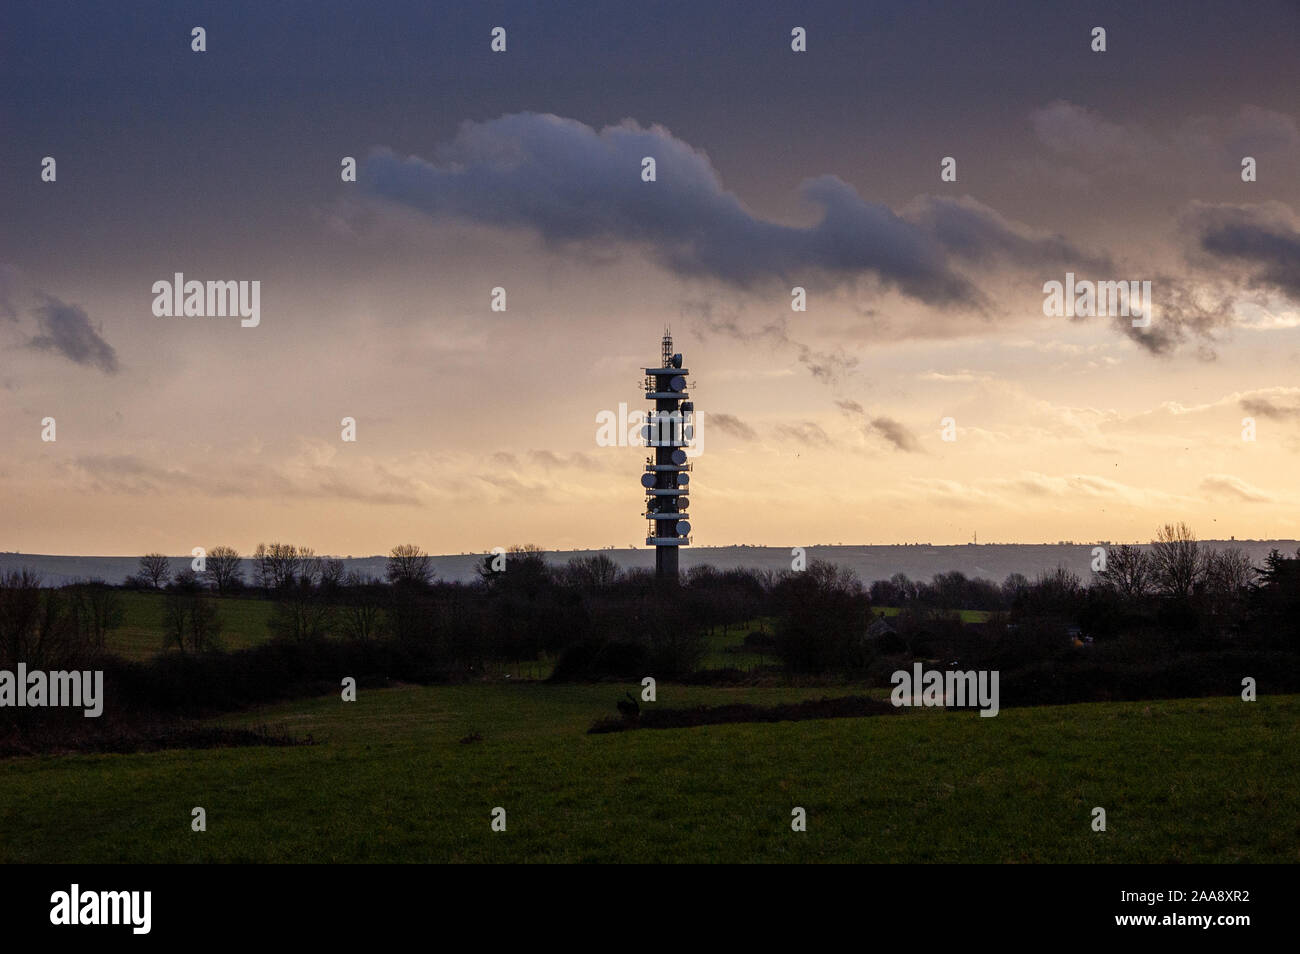 The Purdown BT microwave network transmitter rises from parkland in the Lockleaze neighbourhood of North Bristol. Stock Photo